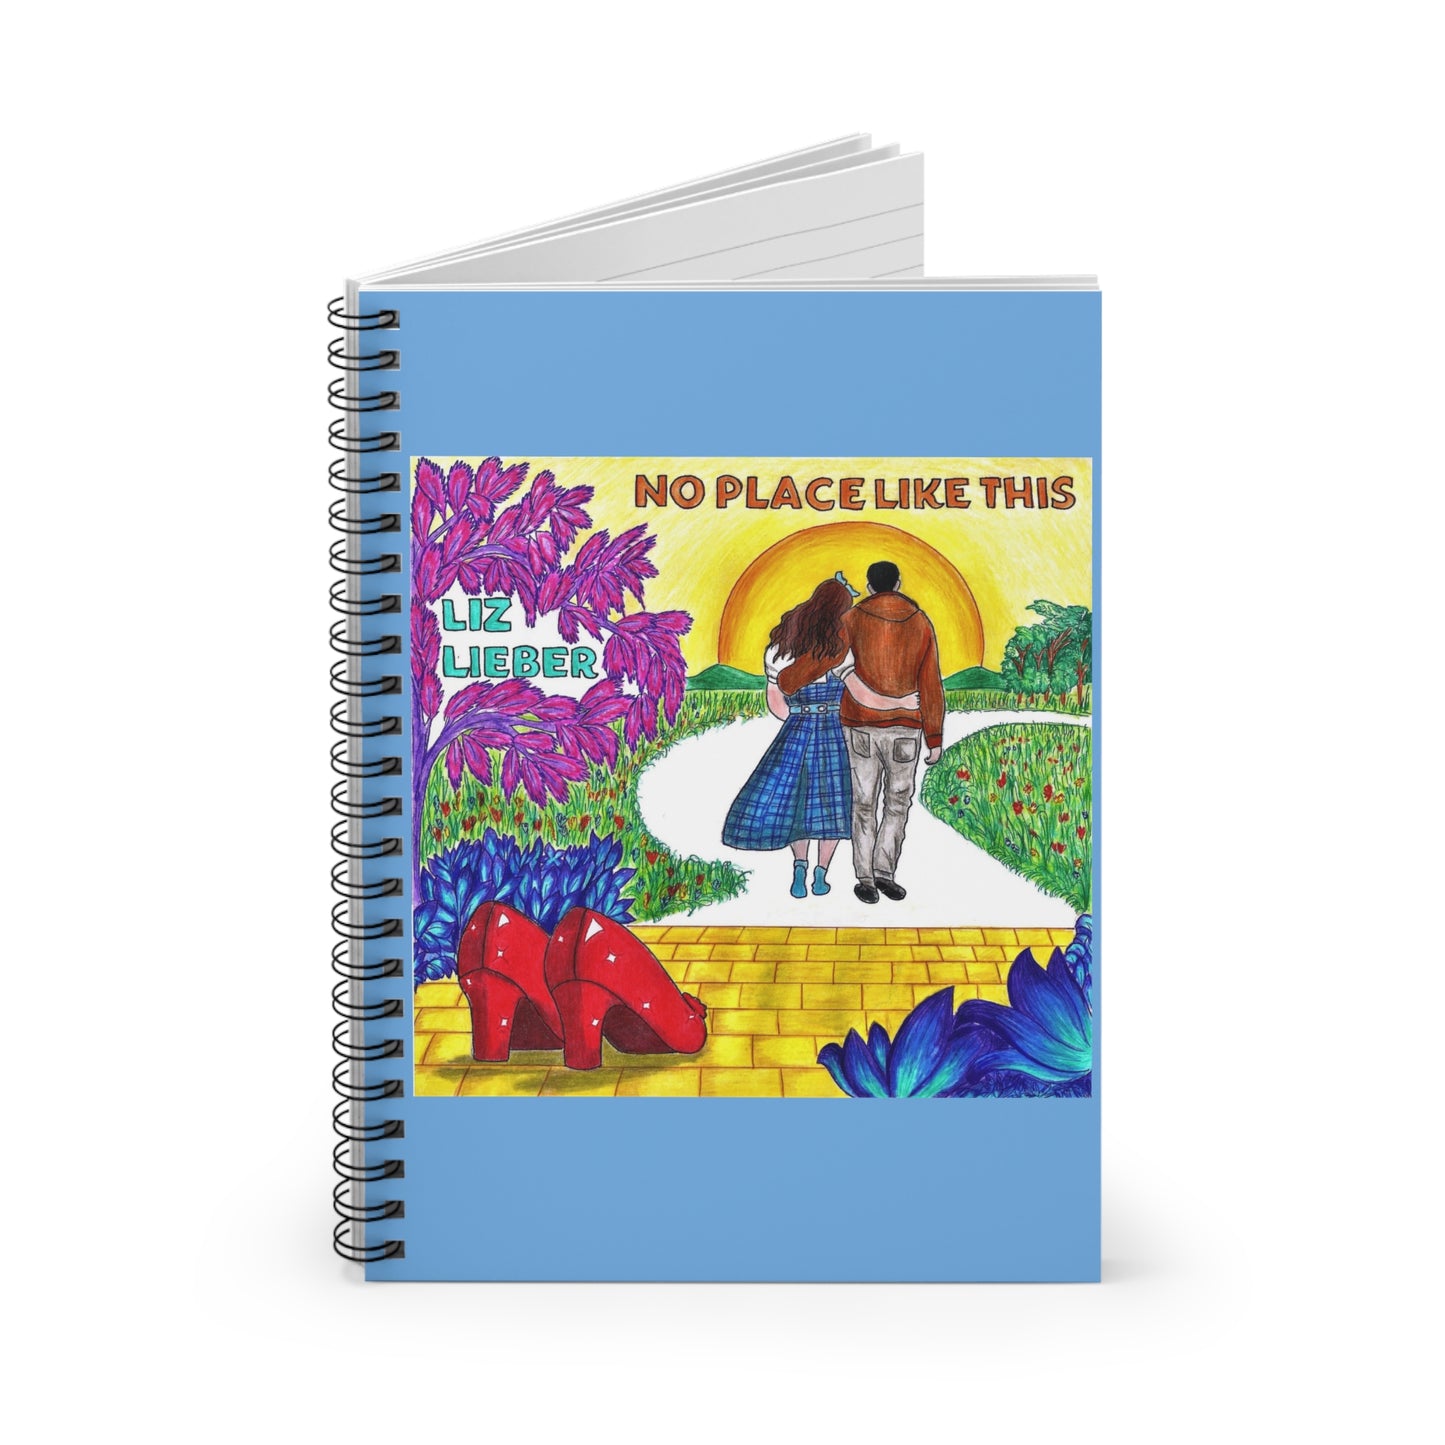 "No Place Like This" Spiral Notebook - Ruled Line